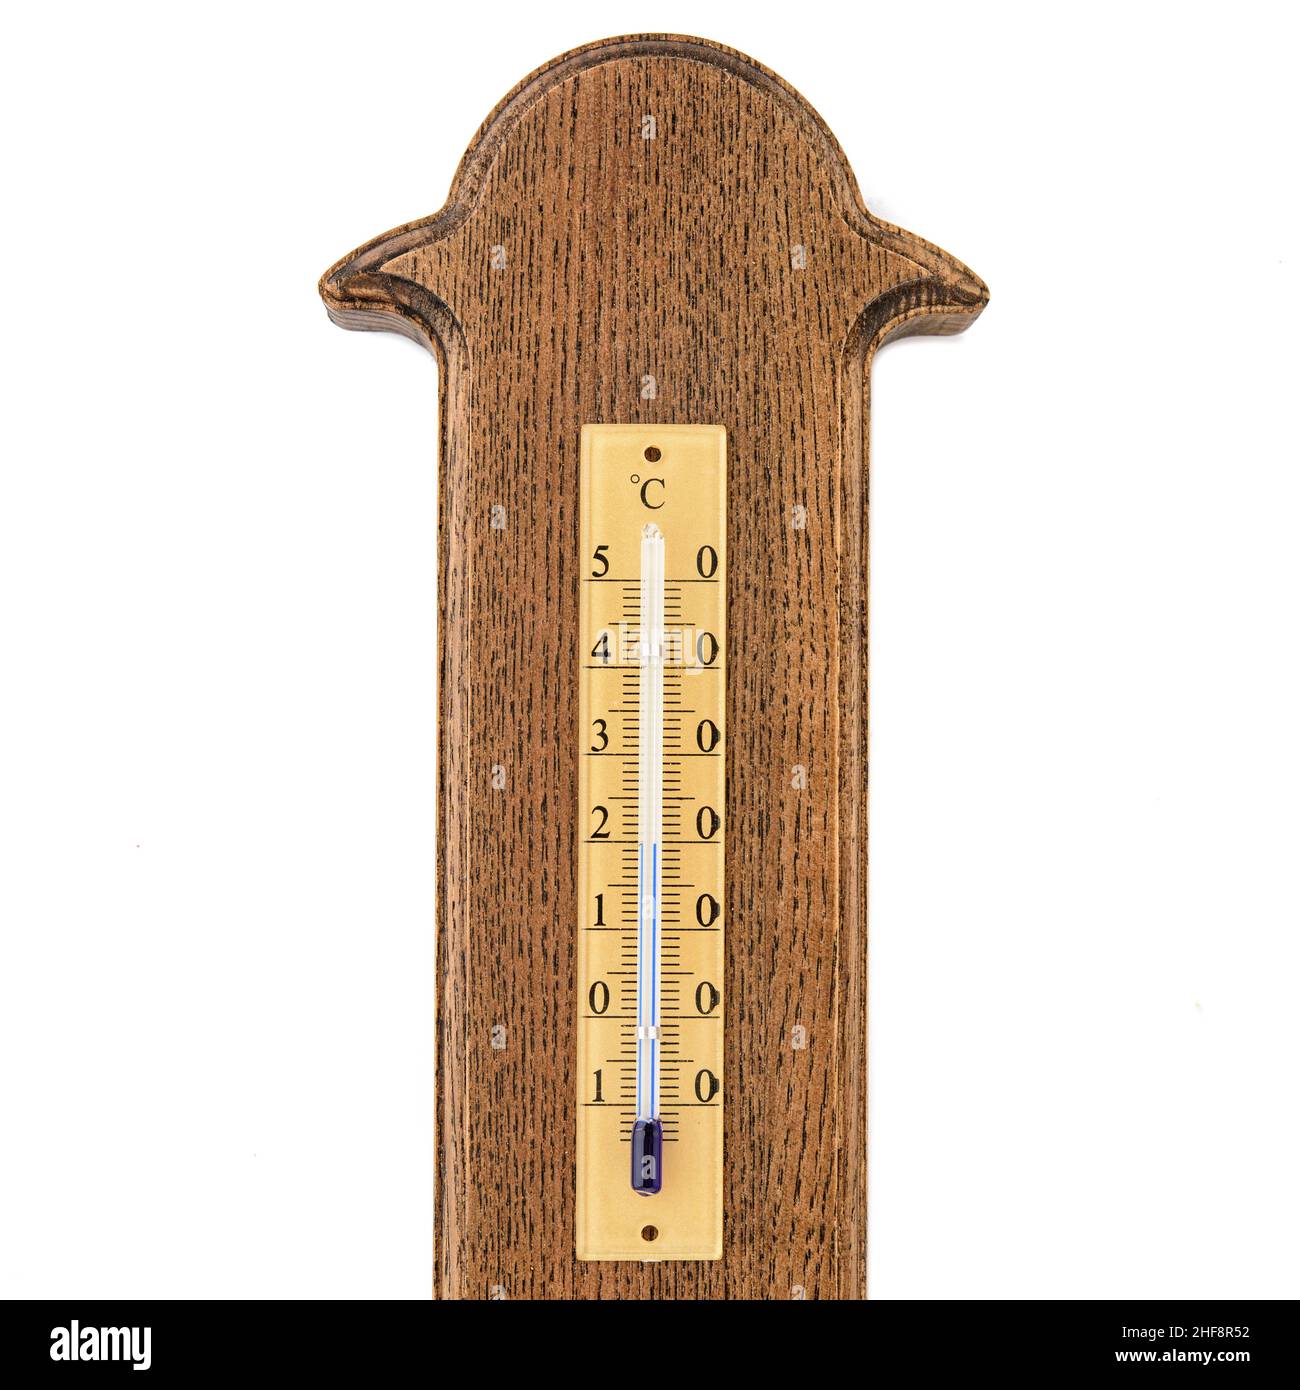 https://c8.alamy.com/comp/2HF8R52/old-style-thermometer-on-wood-texture-isolated-on-white-background-room-temperature-2HF8R52.jpg